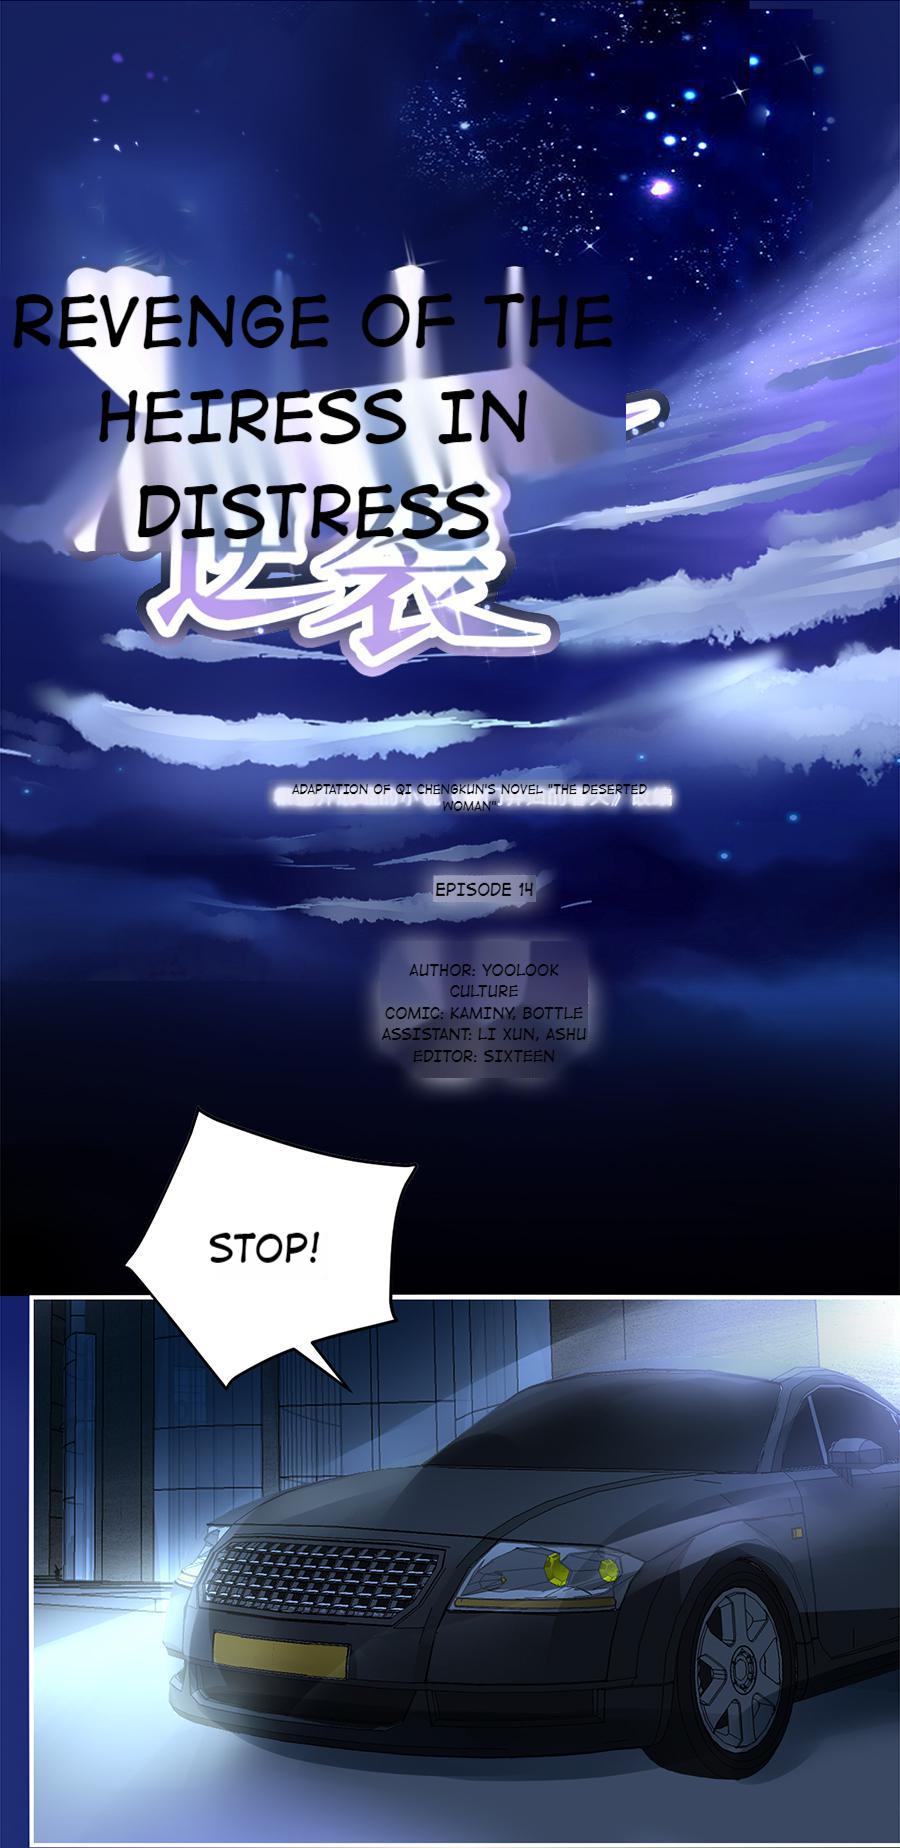 Revenge of the Heiress in Distress 14